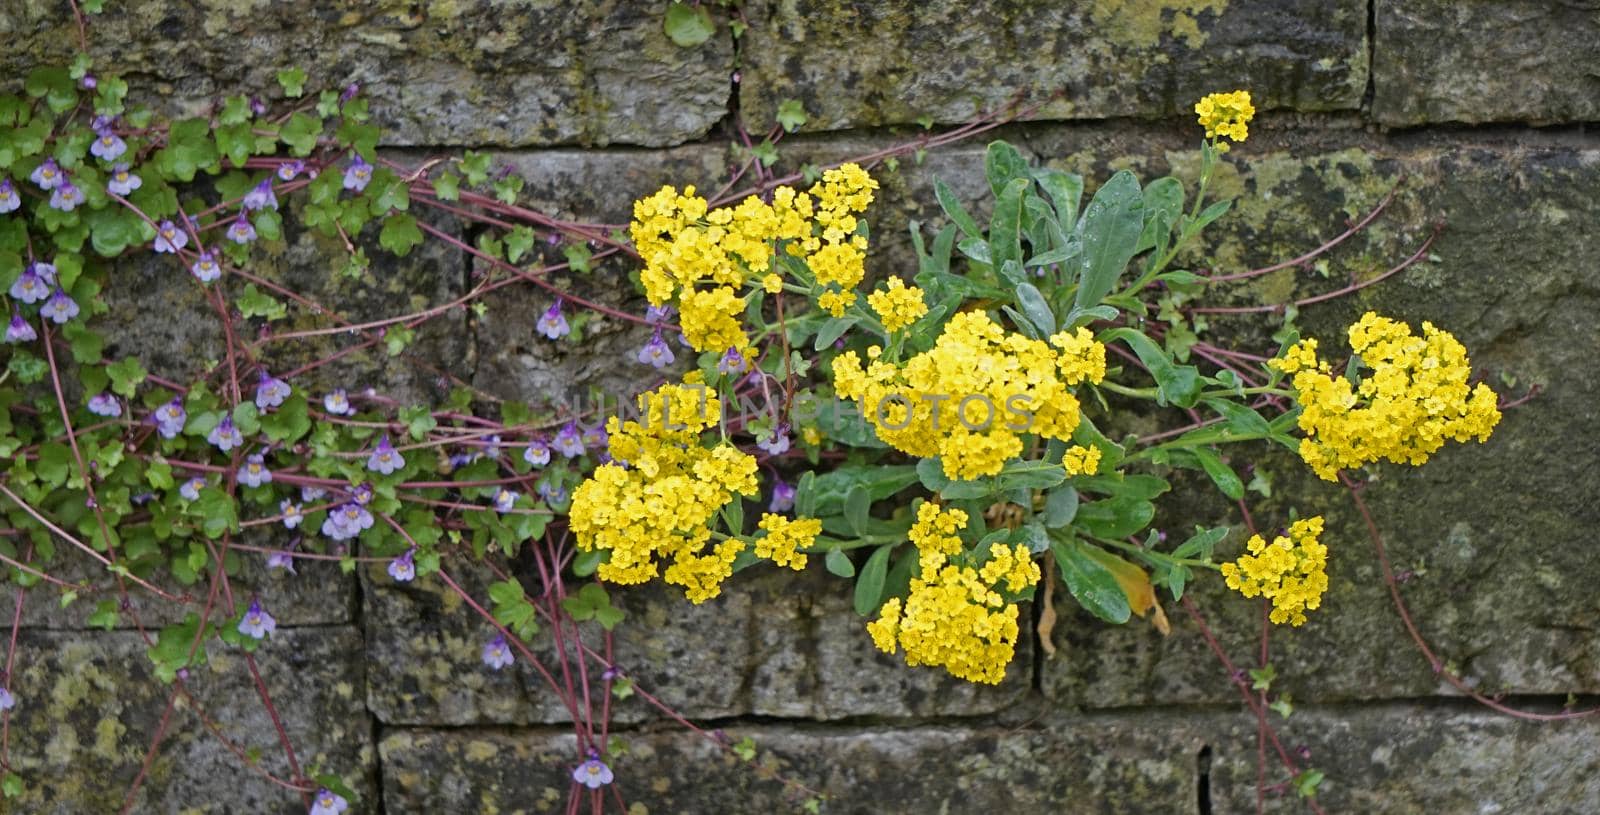 Cymbalaria muralis or ivy-leaved toadflax combined with Aurinia saxatilis or  basket of gold grow in the joints of a wall